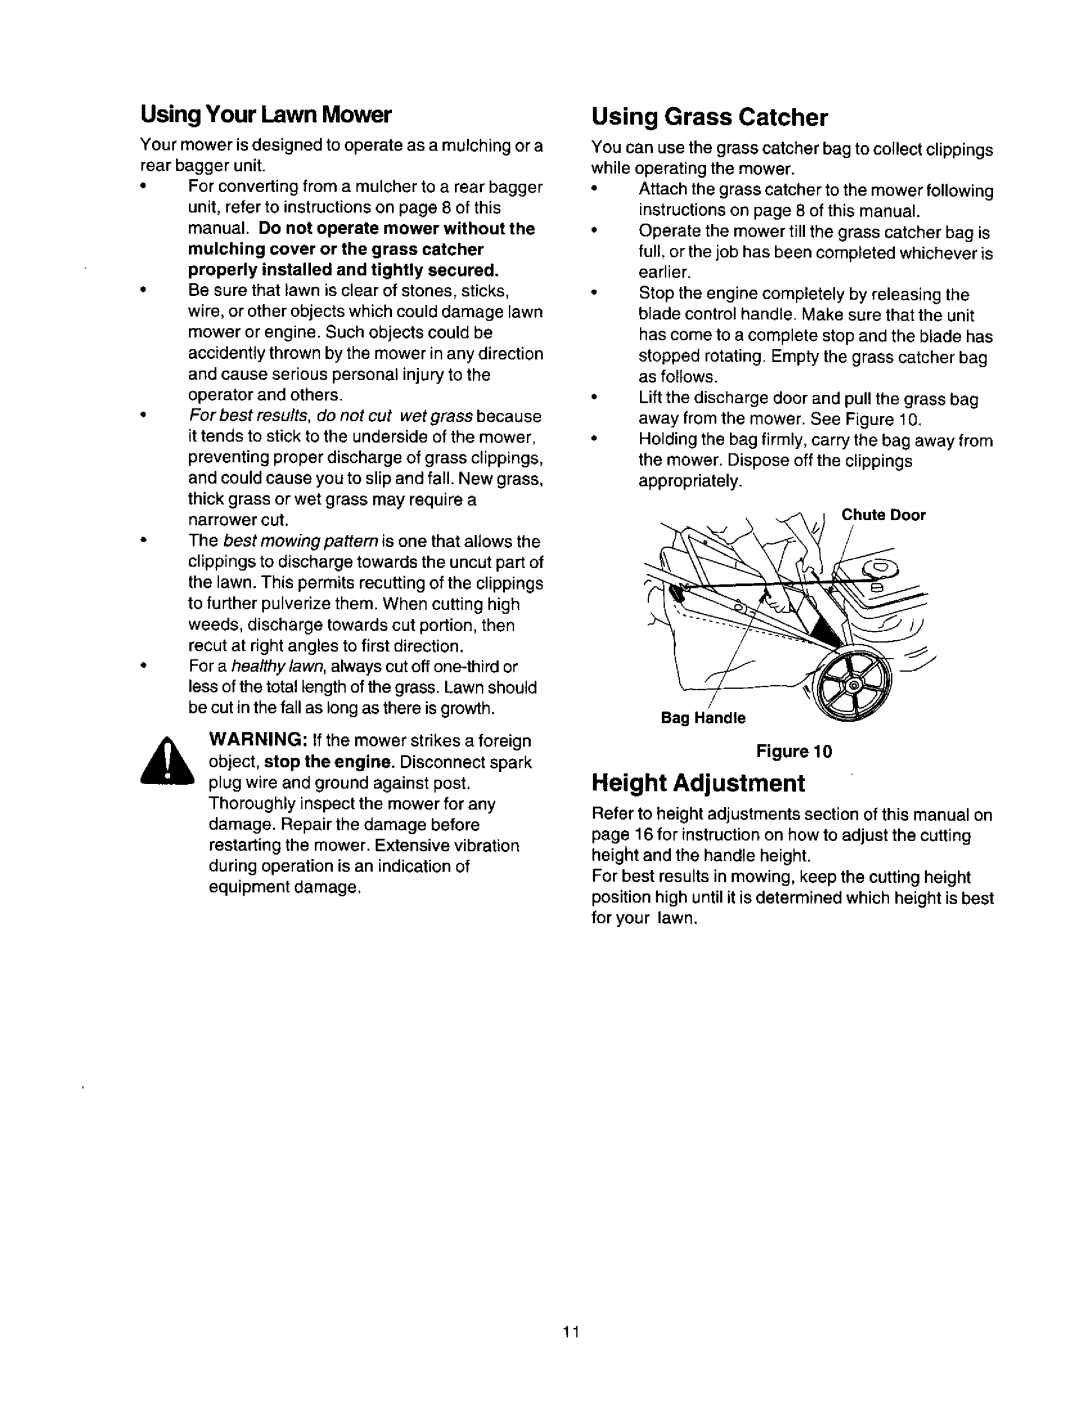 Craftsman 247.388250 owner manual Using Grass Catcher, Height Adjustment, Using Your Lawn Mower 